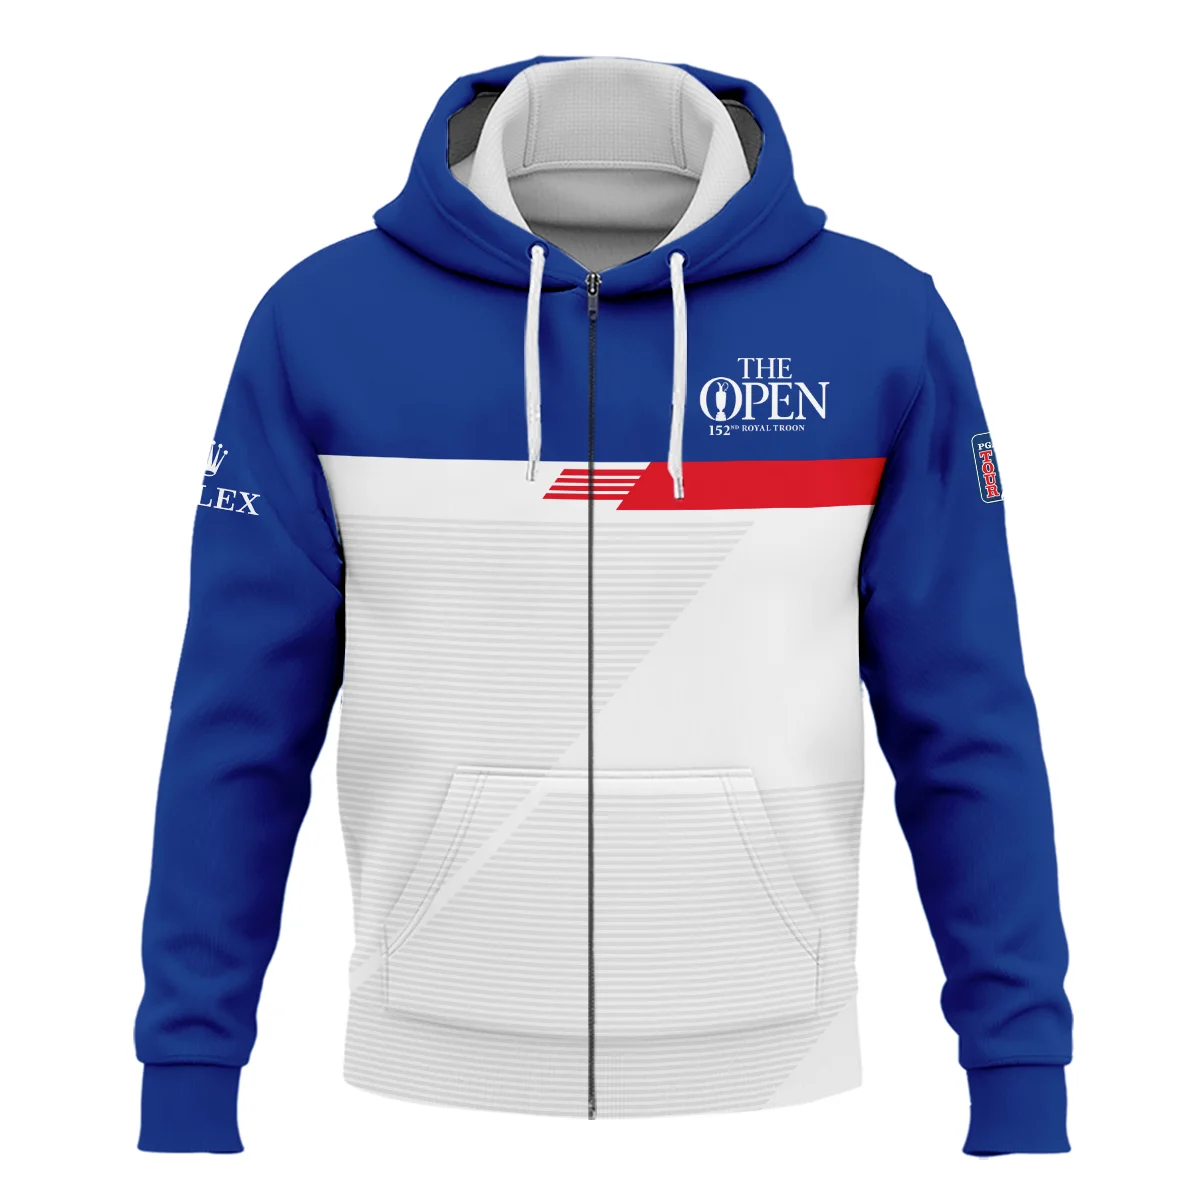 152nd Open Championship Golf Blue Red White Line Pattern Background Rolex Quarter-Zip Jacket All Over Prints HOTOP260624A01ROXSWZ